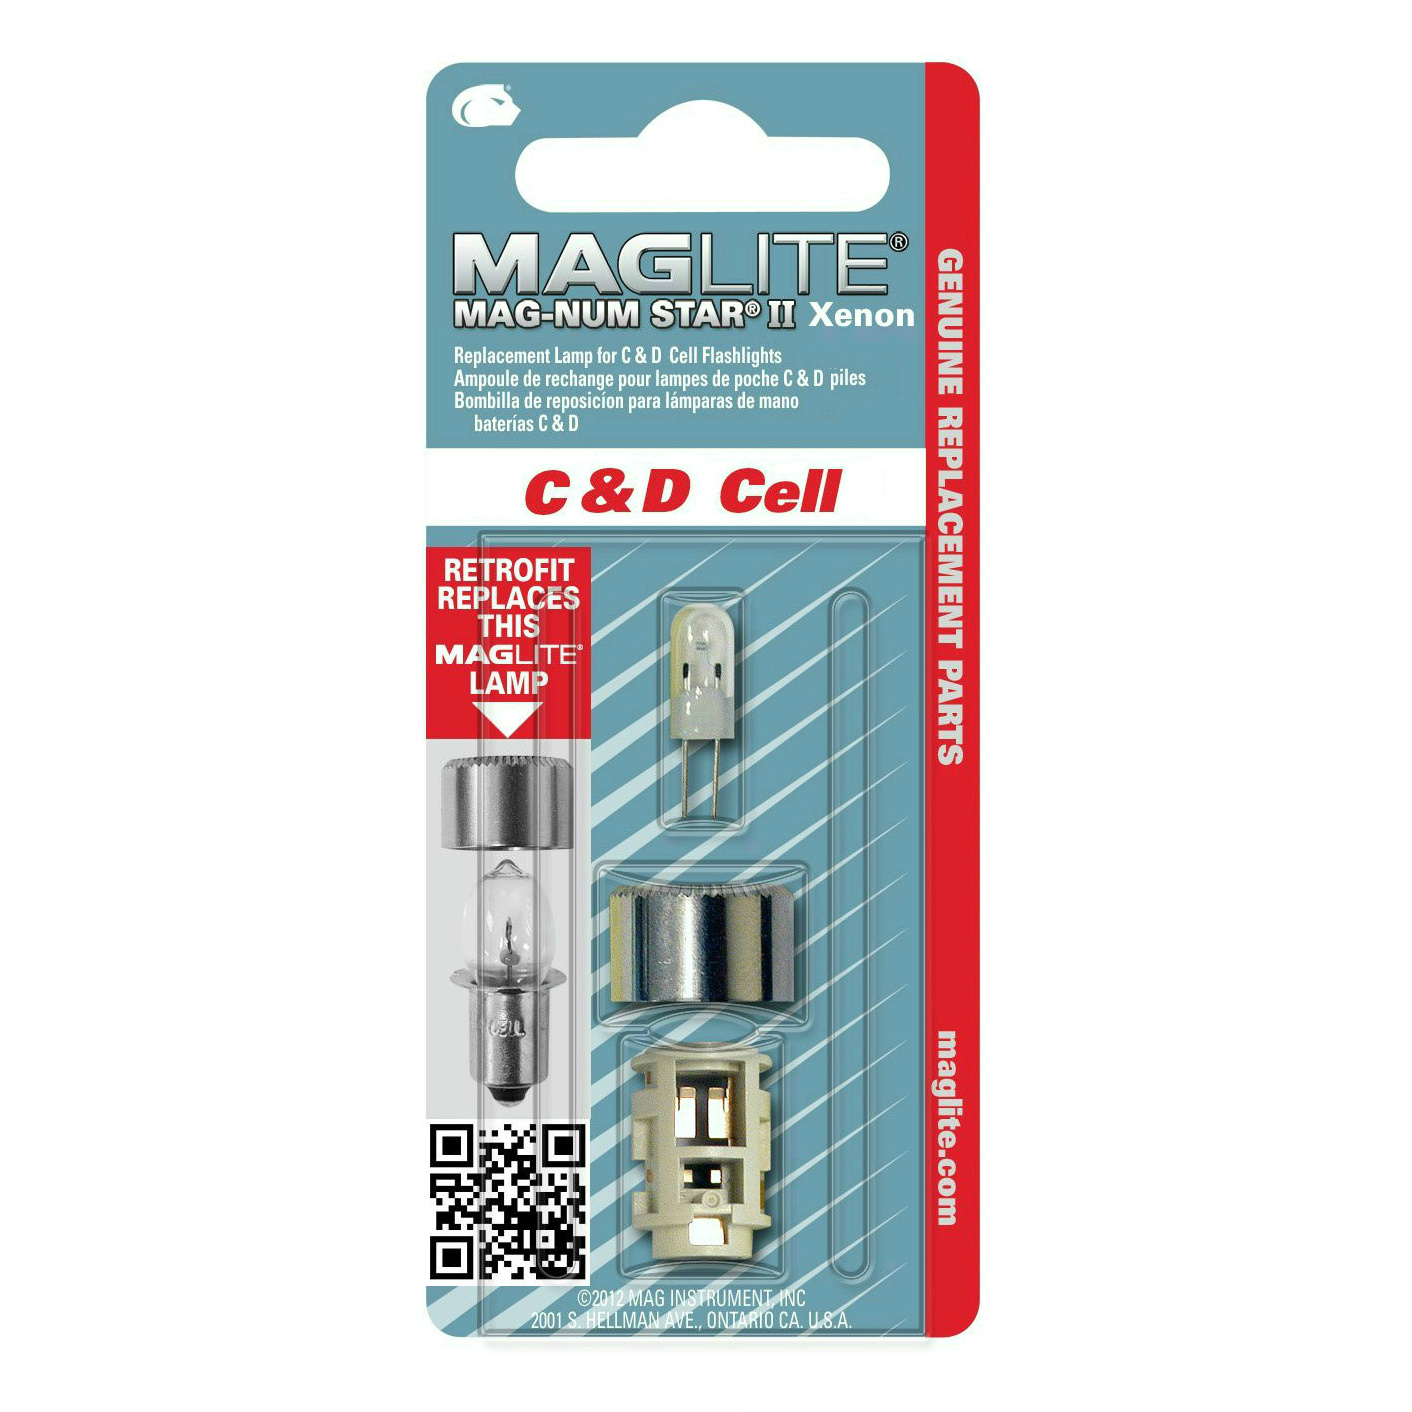 Maglite torch - Magnum Star II Xenon bulb - 5 Cell torch - single bulb pack - official Maglite stockist